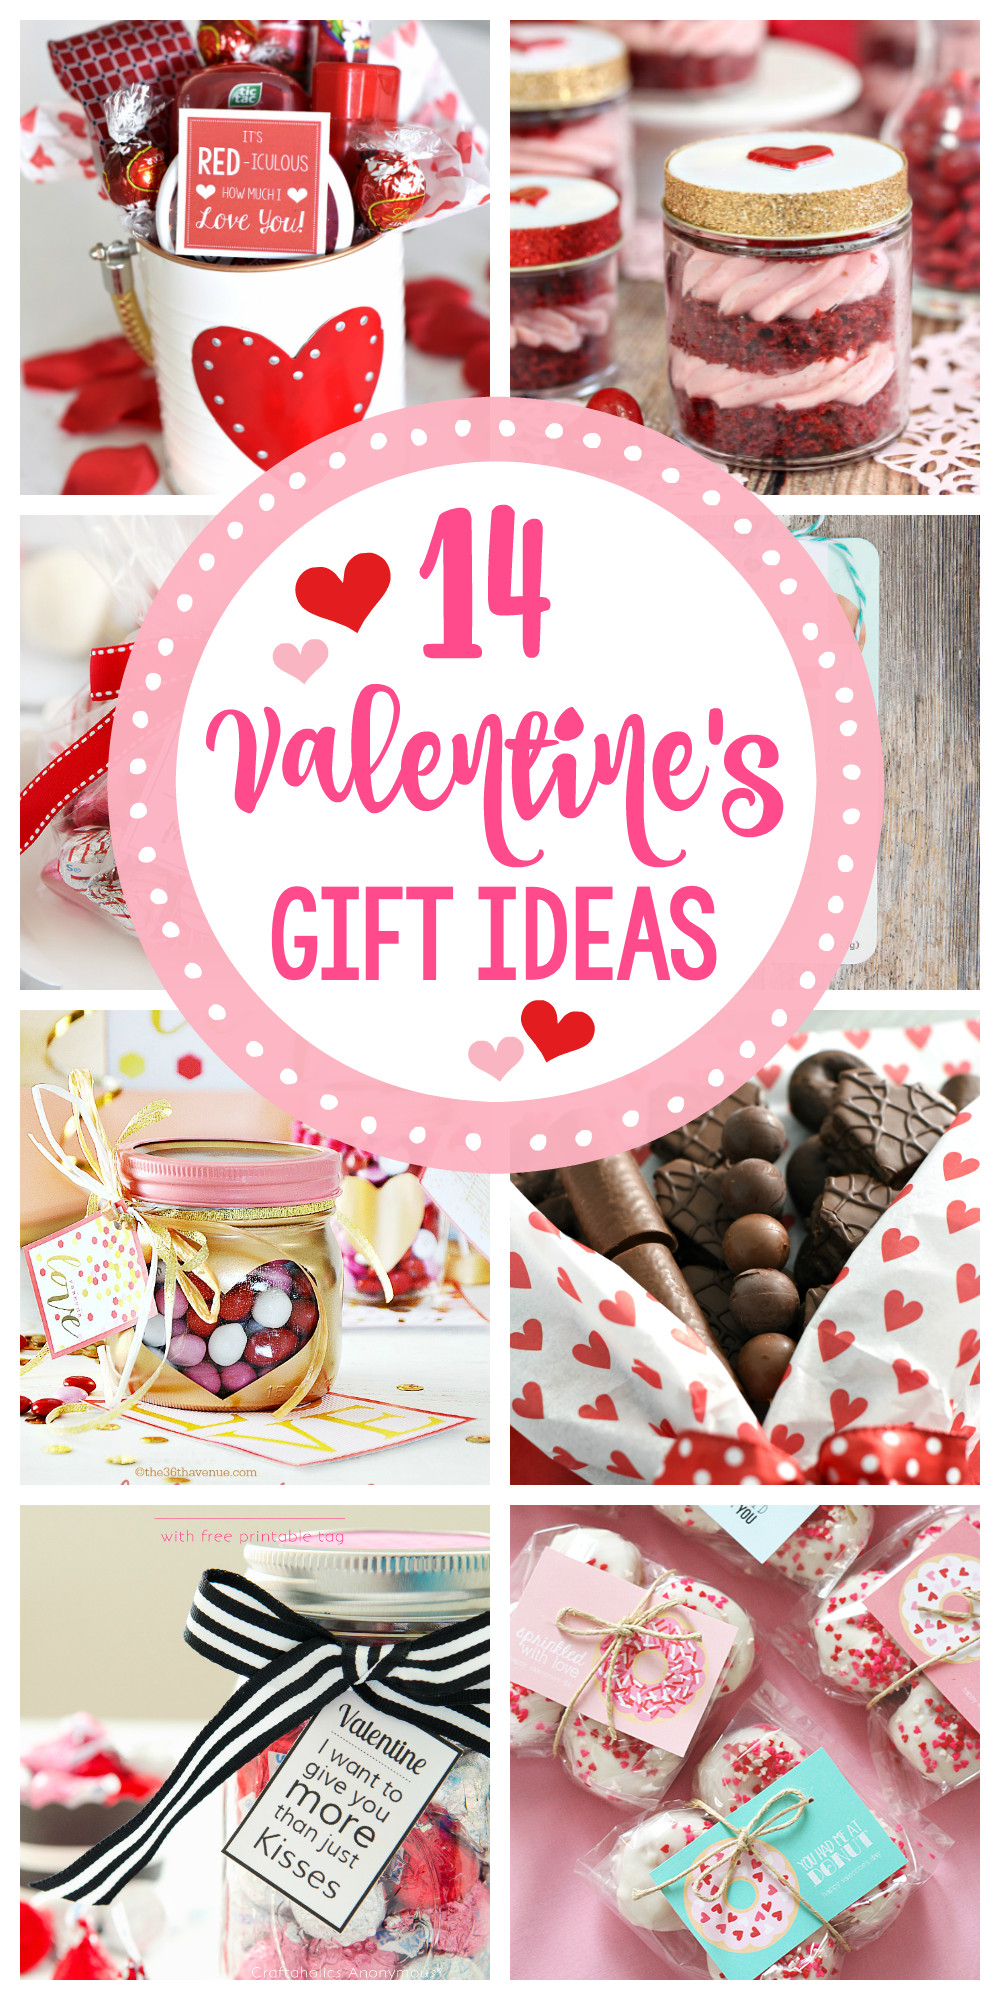 Friend Valentines Day Gift Ideas
 14 Valentine s Day Gift Ideas to give to your husband